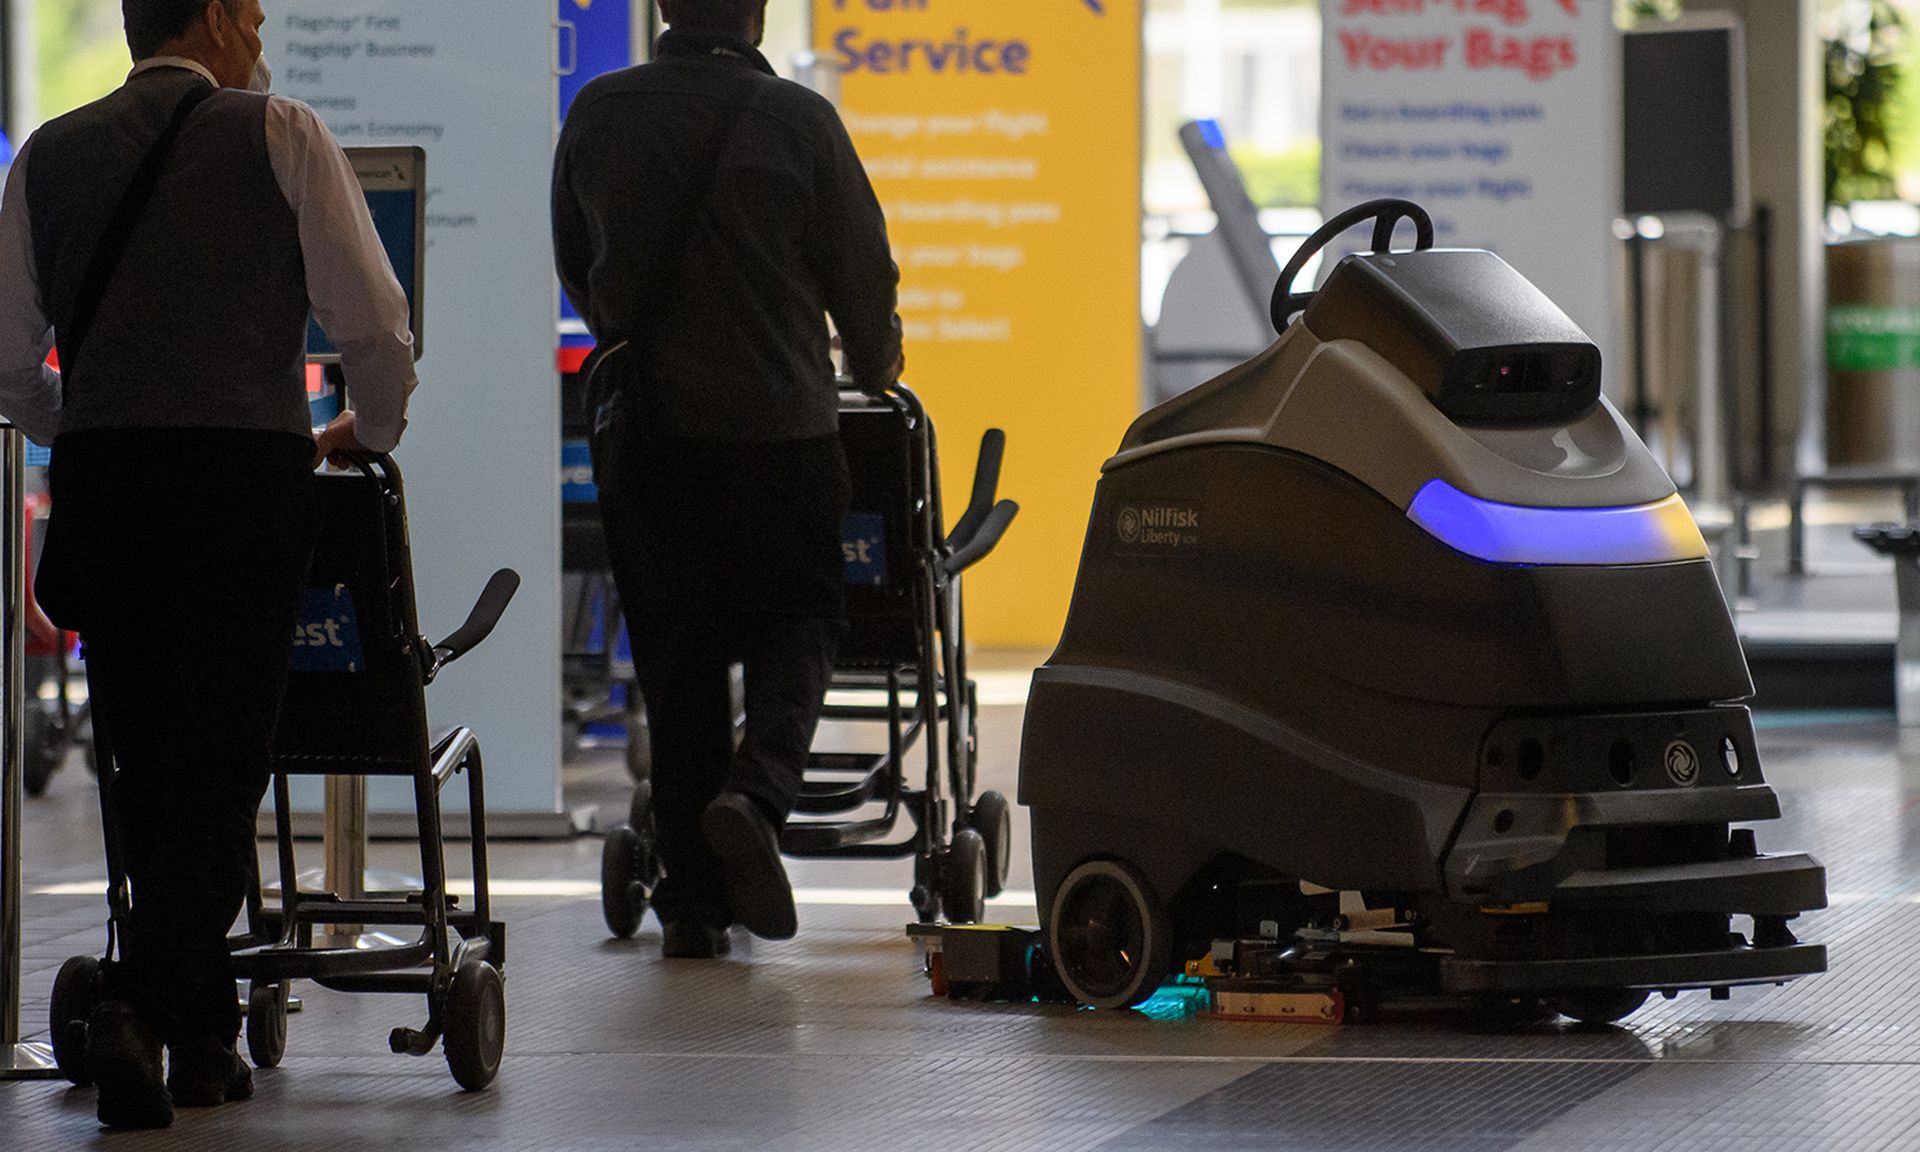 Nearly all of the 800 respondents to a Barracuda Network survey, 93%, said they&#8217;ve failed in security IIoT and OT projects. Pictured: A UV cleaning robot cleans the floor near the ticketing windows at Pittsburgh International Airport on May 7, 2020, in Pittsburgh, Pa. (Photo by Jeff Swensen/Getty Images)